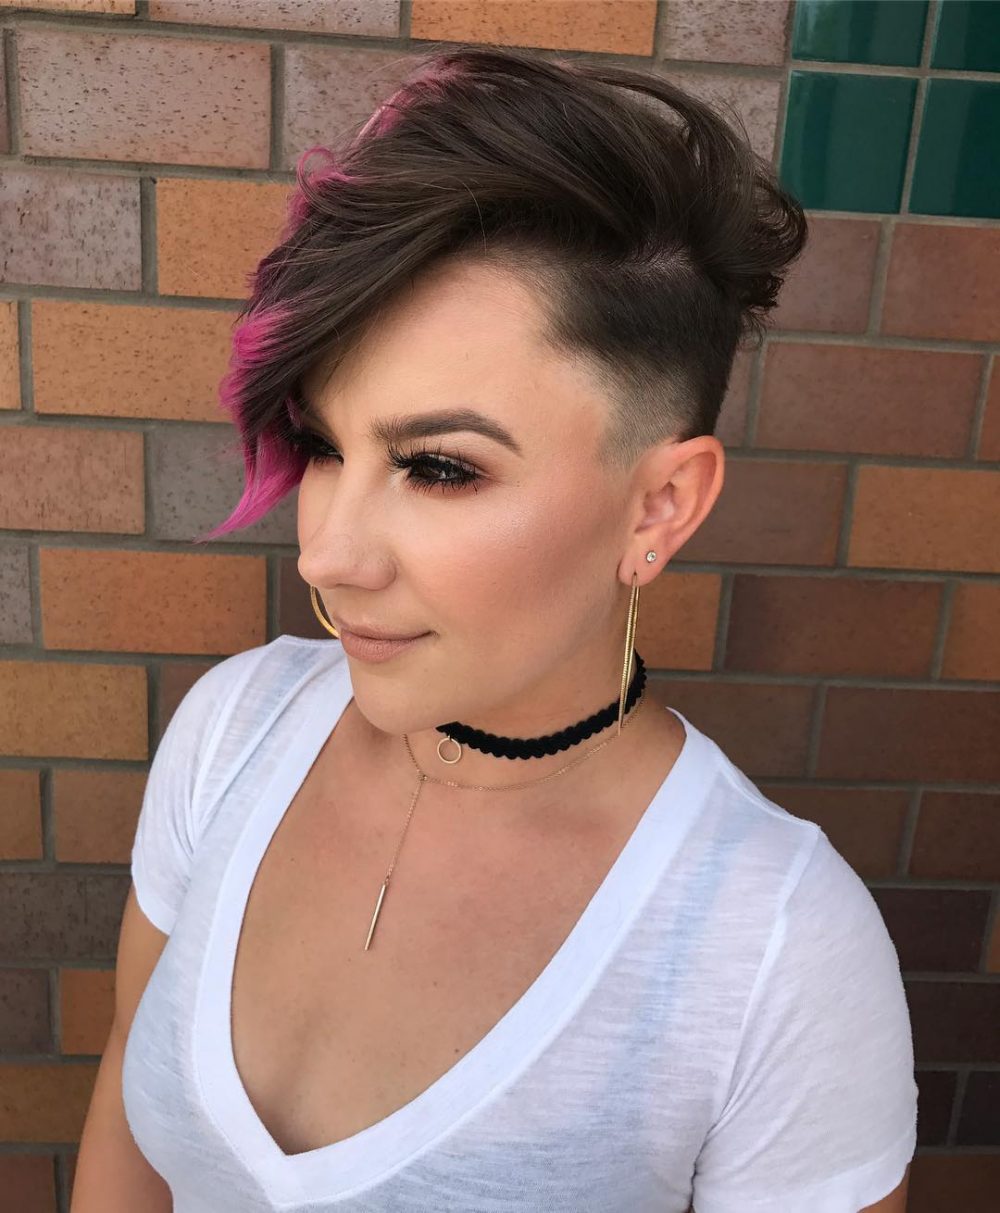 26 Coolest Women's Undercut Hairstyles To Try in 2022